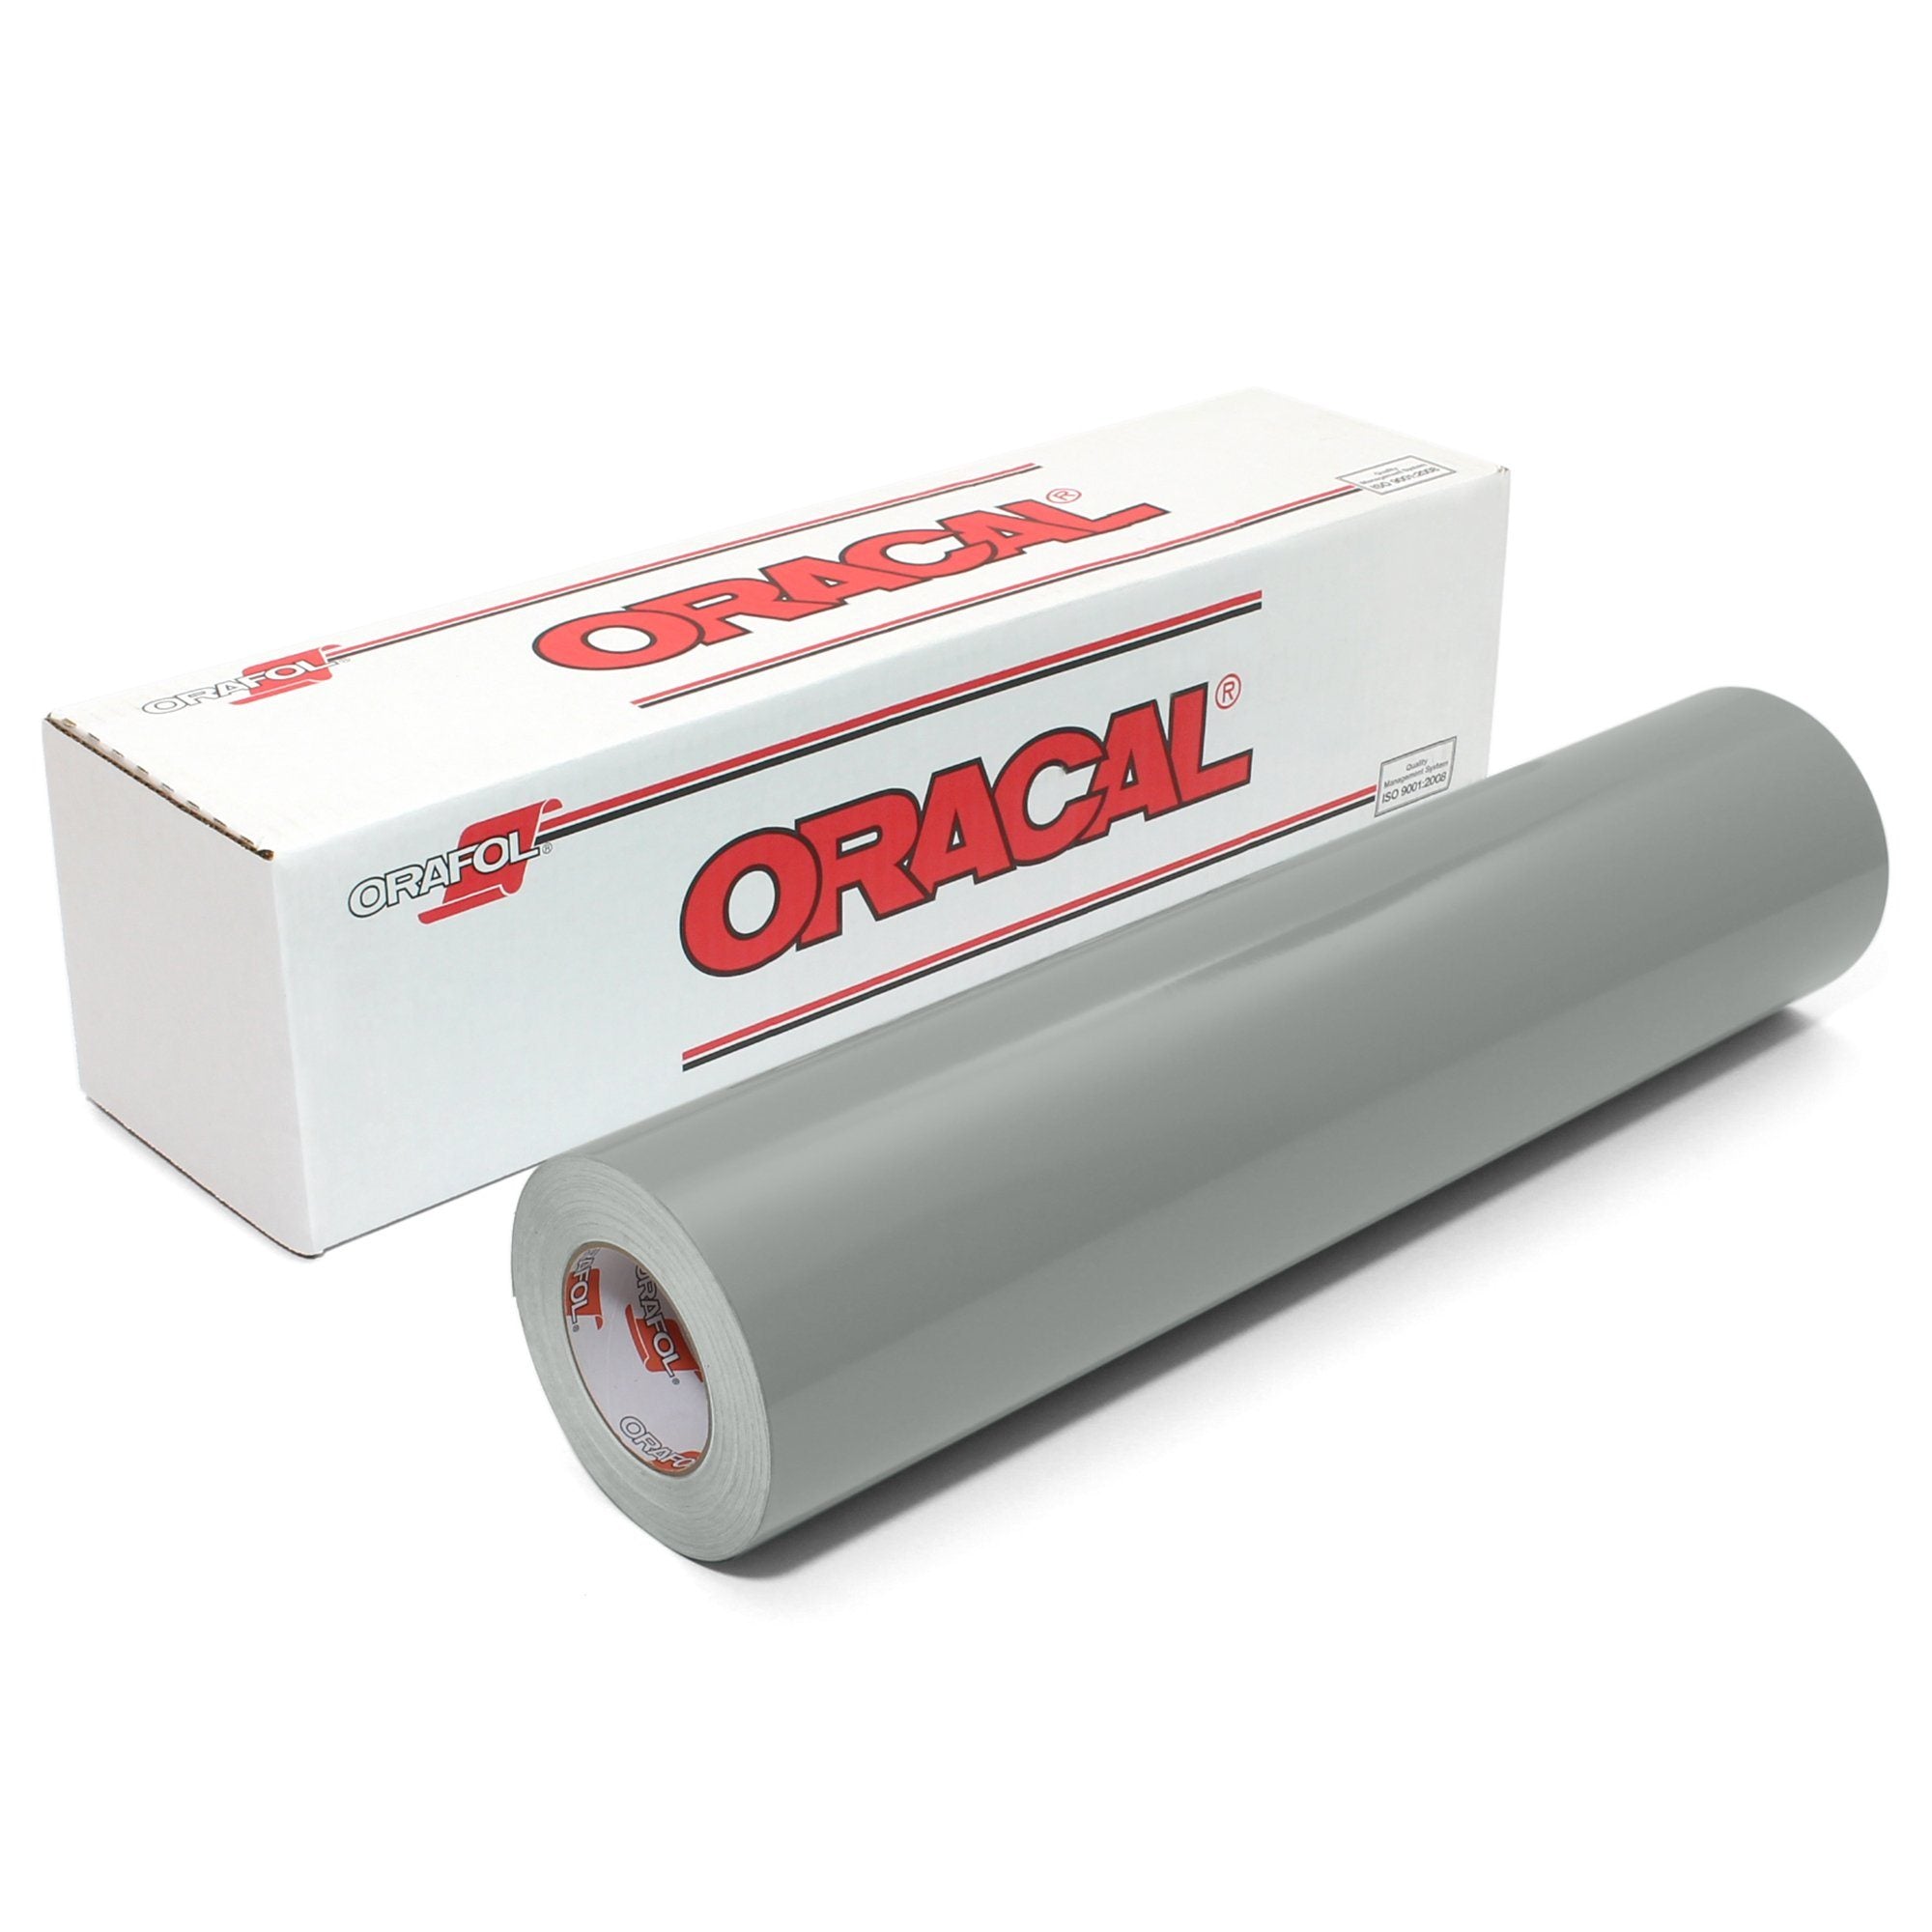 Oracal 651 Glossy 12 x 6 ft Vinyl Rolls - 61 Colors